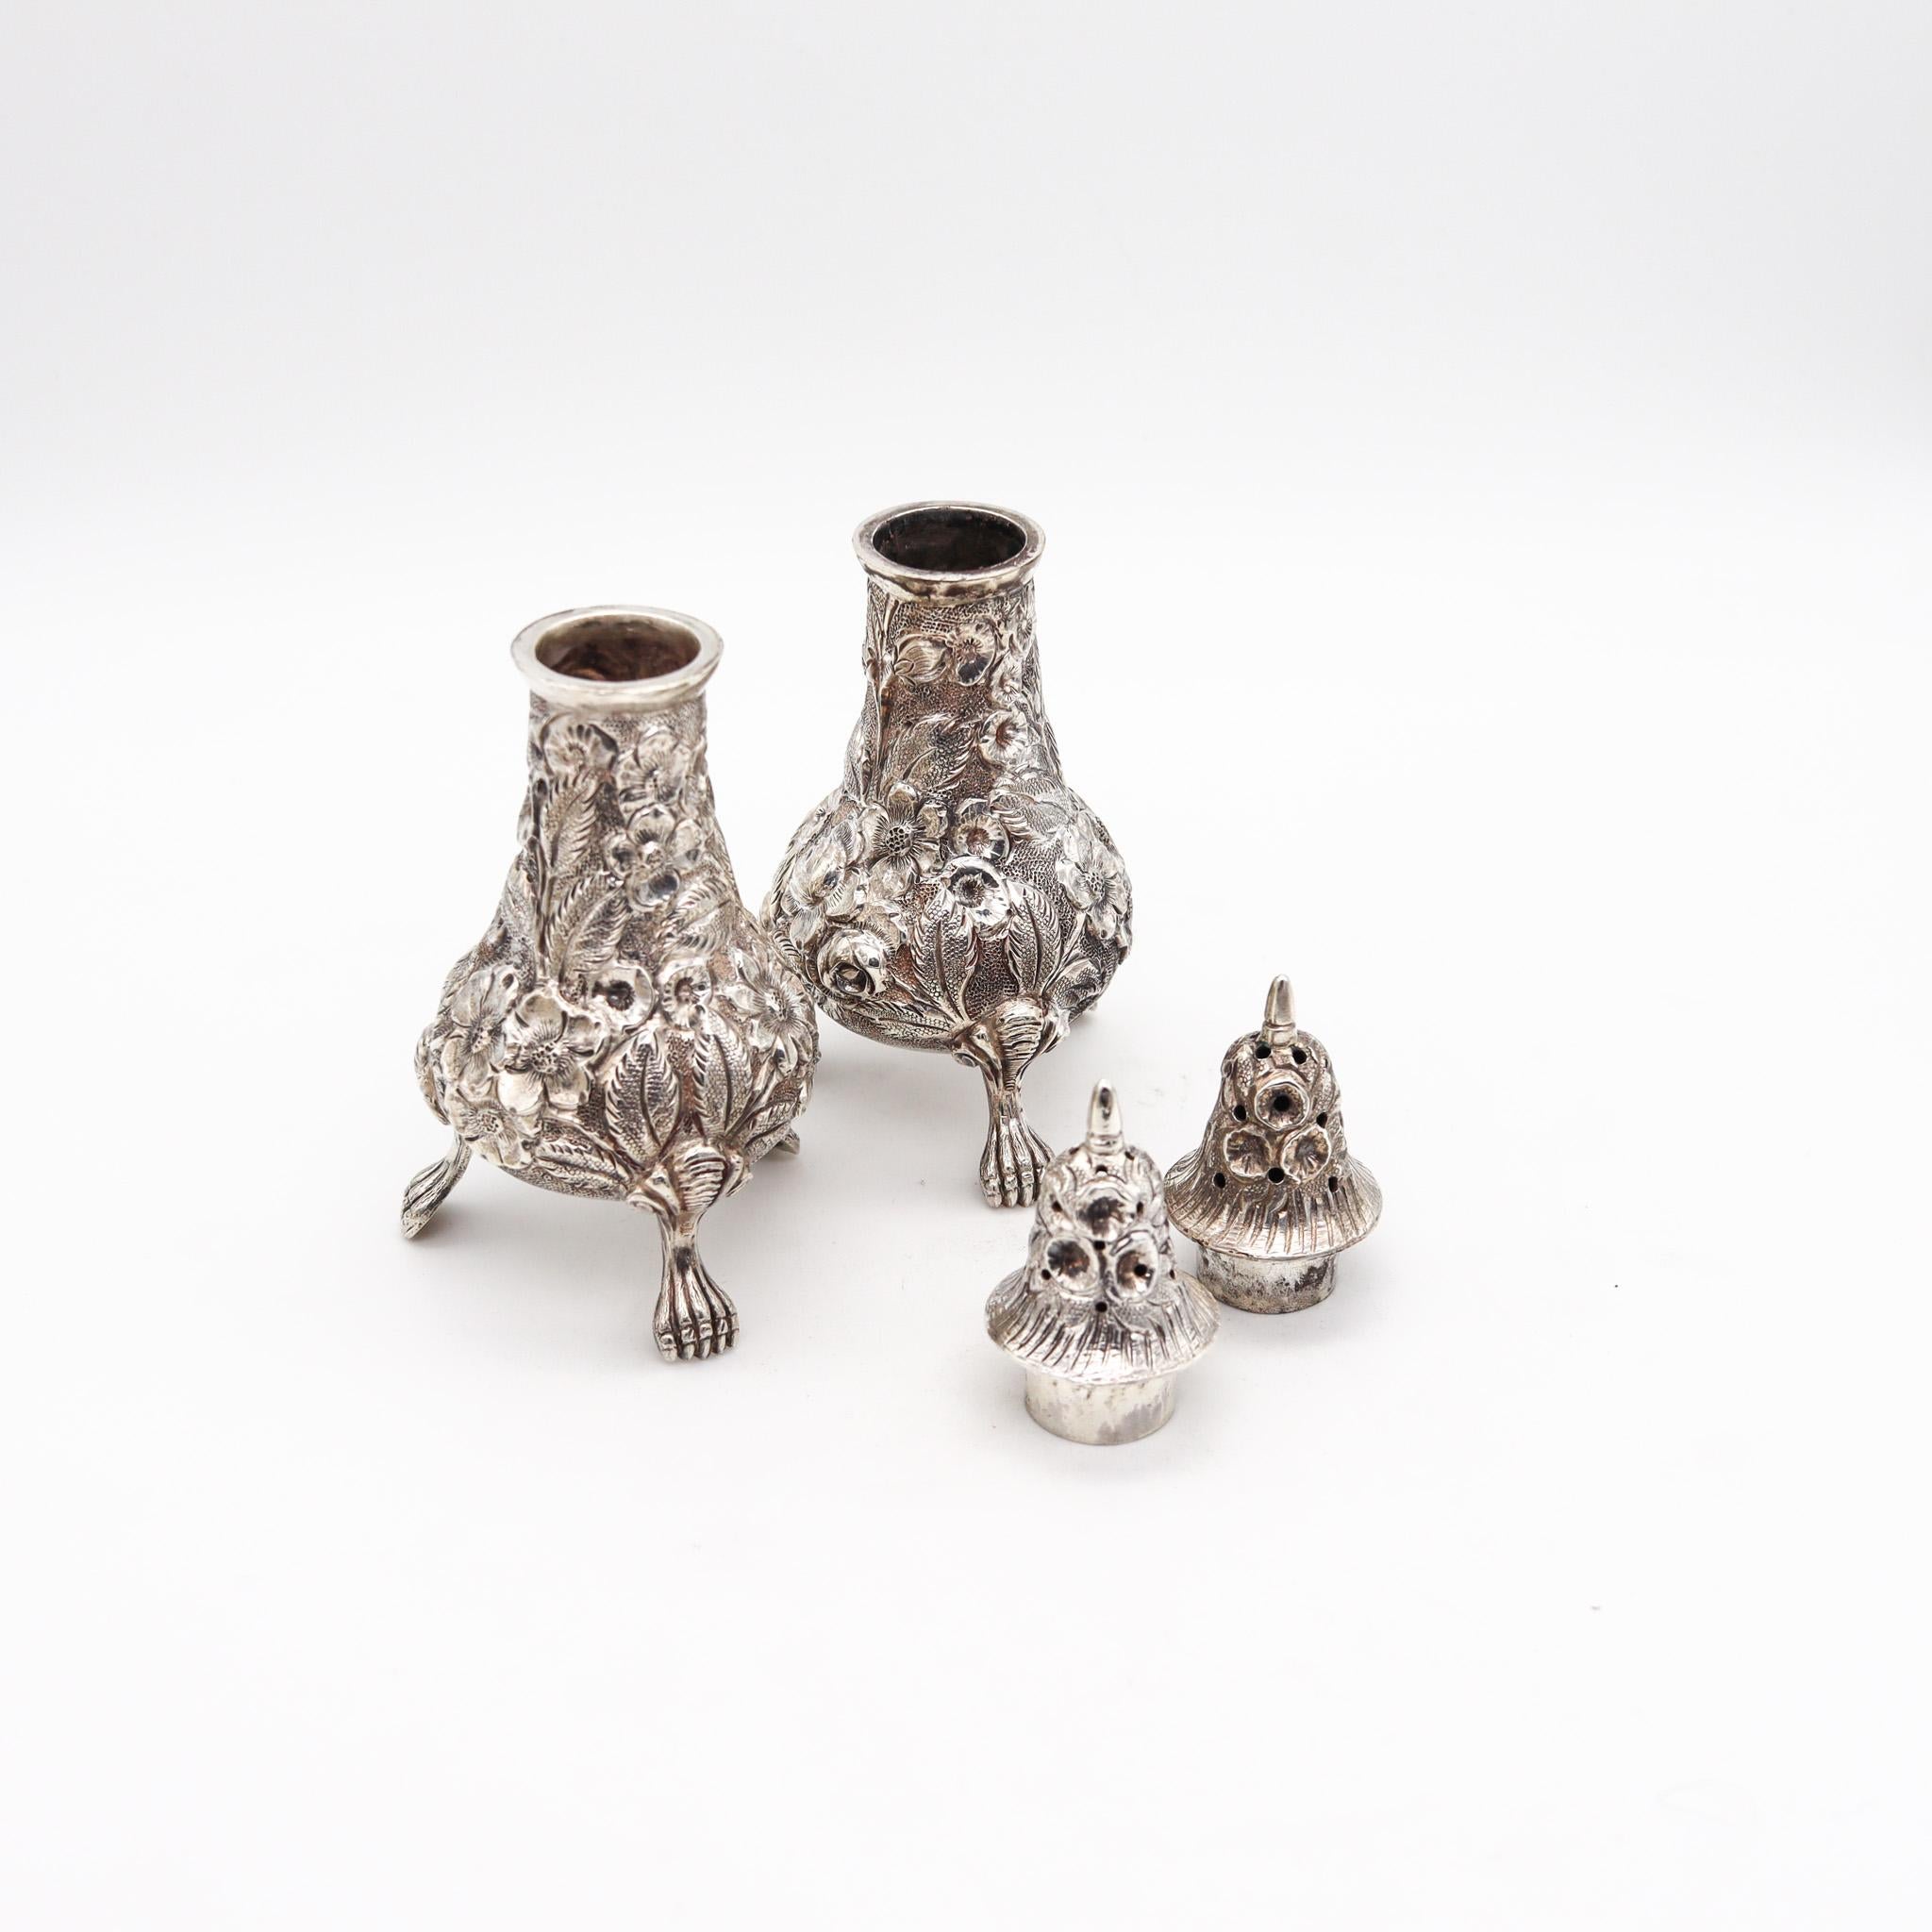 Polished Schofield 1905 Art Nouveau Baltimore Rose Shakers Set in .925 Sterling Silver For Sale